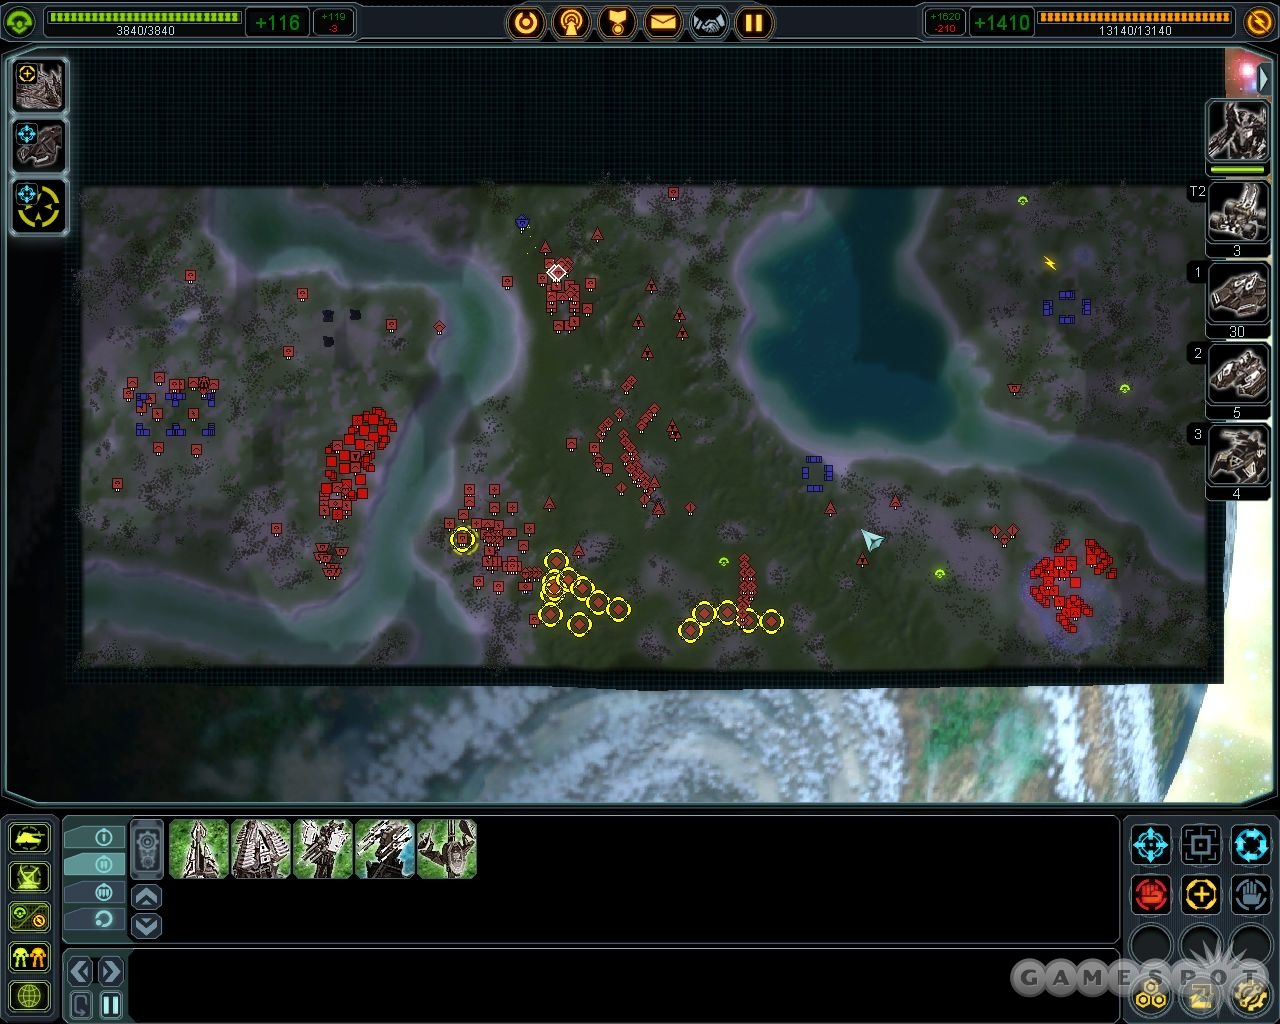 Defend the northern portion of the screen, and the escort should be easy enough to do.